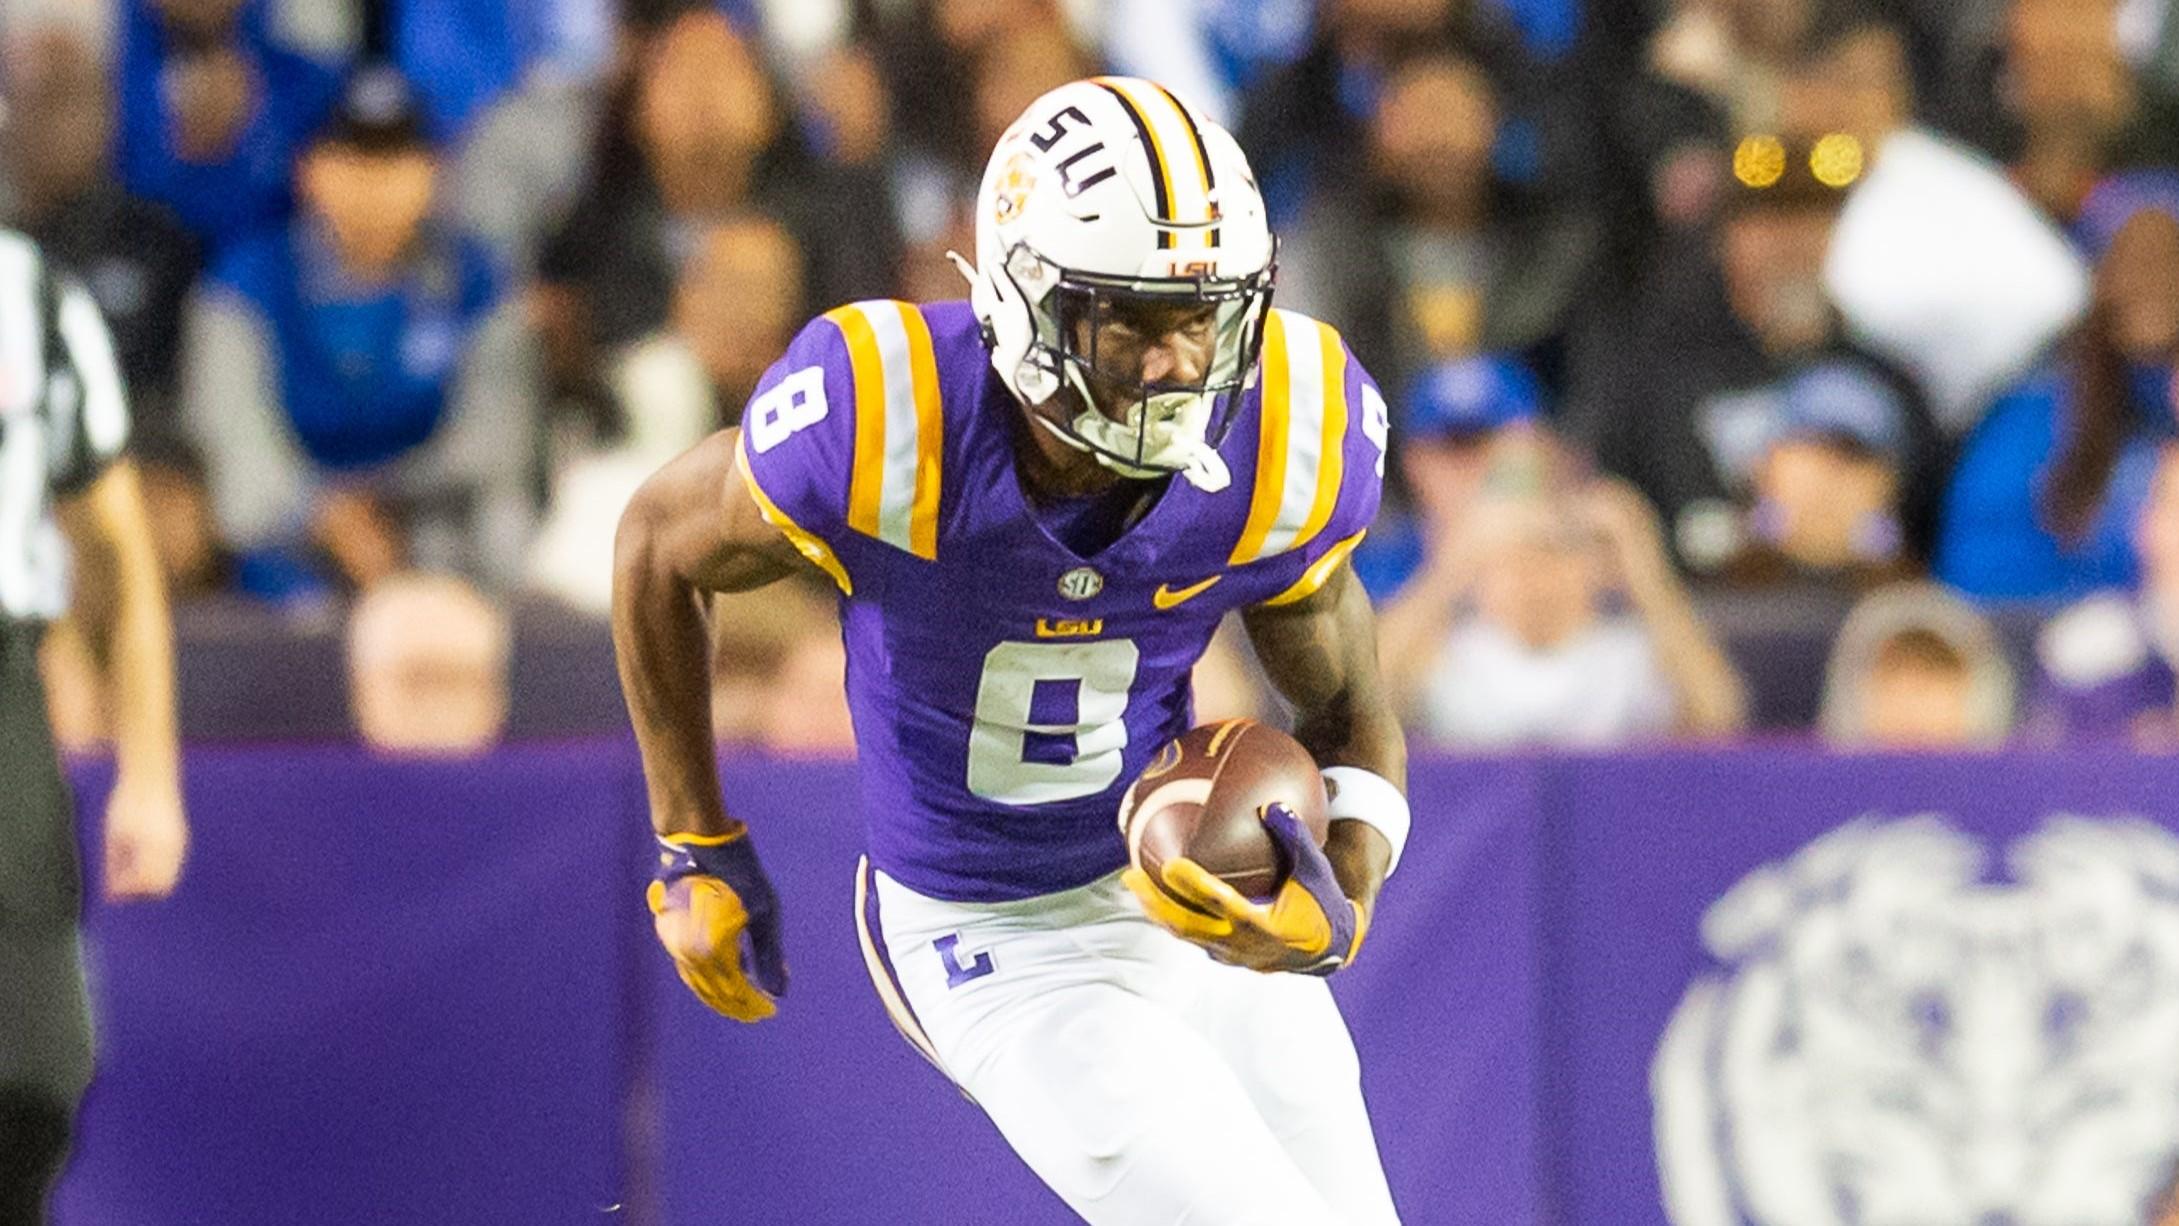 Tigers receiver Malik Nabers 8 runs the ball as the LSU Tigers take on Georgia State in Tiger Stadium in Baton Rouge, Louisiana, November 18, 2023. / © SCOTT CLAUSE/USA TODAY Network / USA TODAY NETWORK